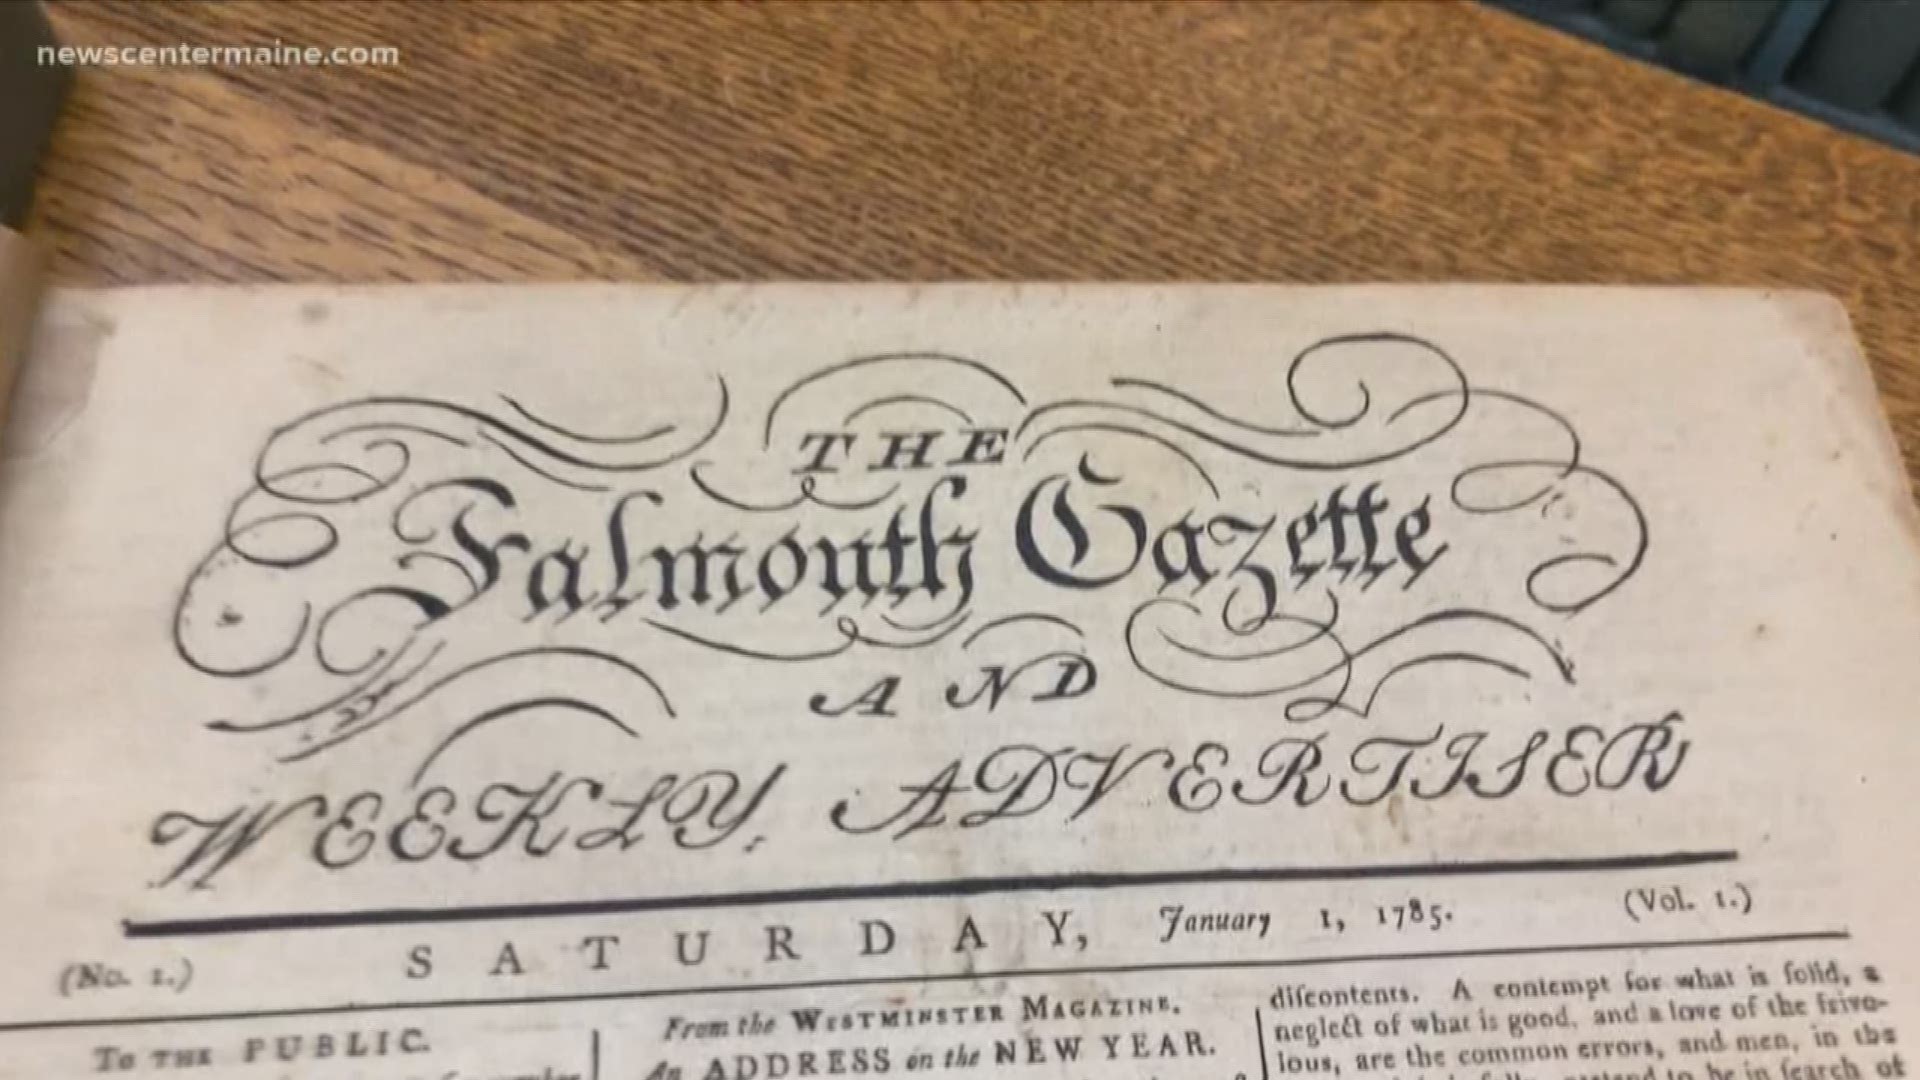 Beth McEvoy looks at Maine's earliest newspapers with the Maine Historical Society.